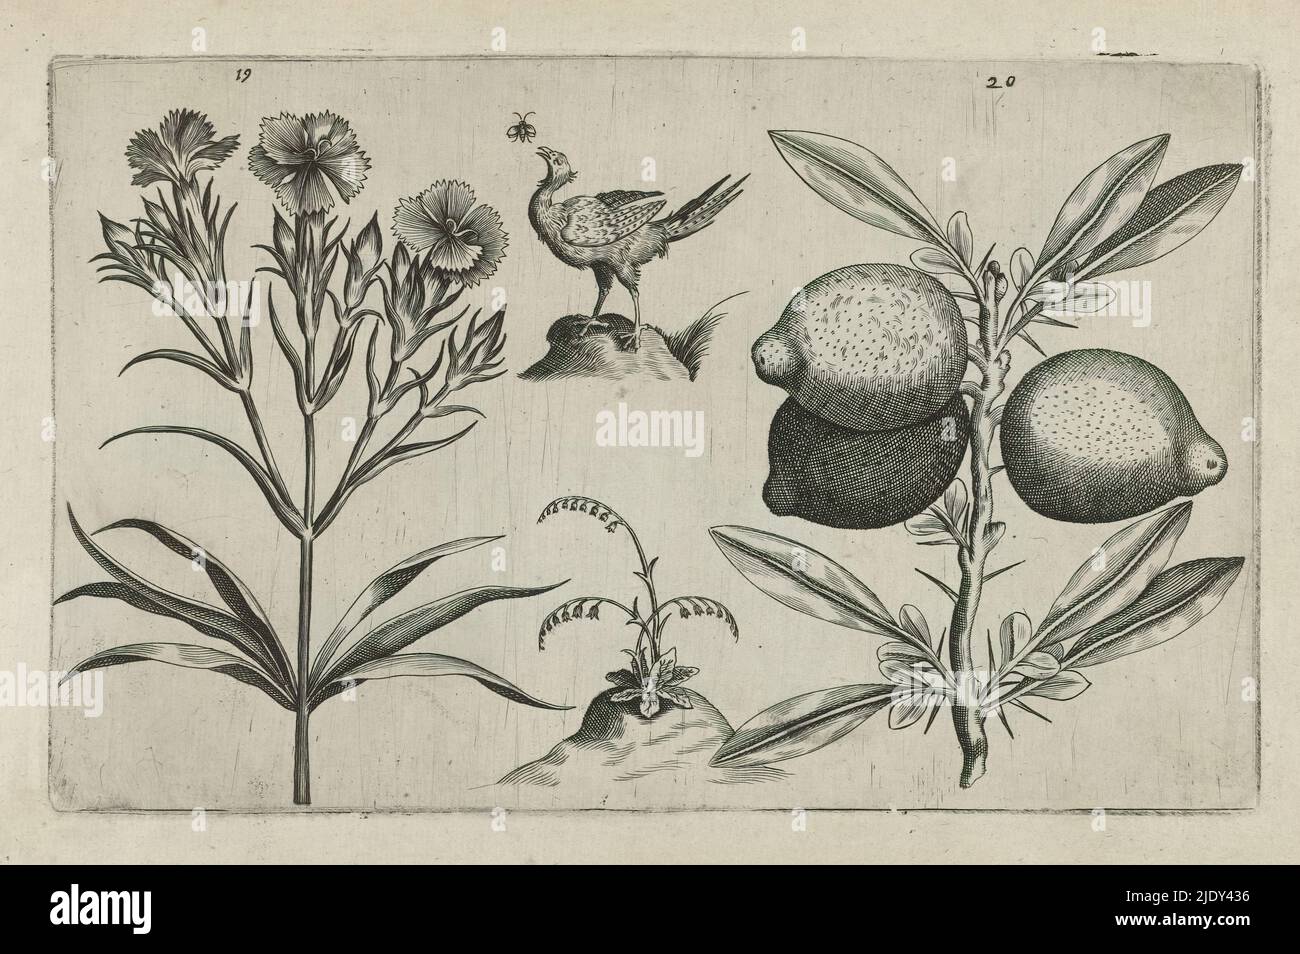 Garden carnation and lemon, Cognoscite lilia (series title), A stem with three flowering garden carnations (Dianthus caryophyllus) and a branch with three large lemons (Citrus limon), numbered 19 and 20. Between them as decoration a chicken and a fly., print maker: Crispijn van de Passe (I), (attributed to), after drawing by: Crispijn van de Passe (I), (attributed to), publisher: Crispijn van de Passe (I), print maker: Cologne, after drawing by: Cologne, publisher: Cologne, publisher: London, 1600 - 1604, paper, engraving, height 127 mm × width 205 mm, height 172 mm × width 272 mm Stock Photo